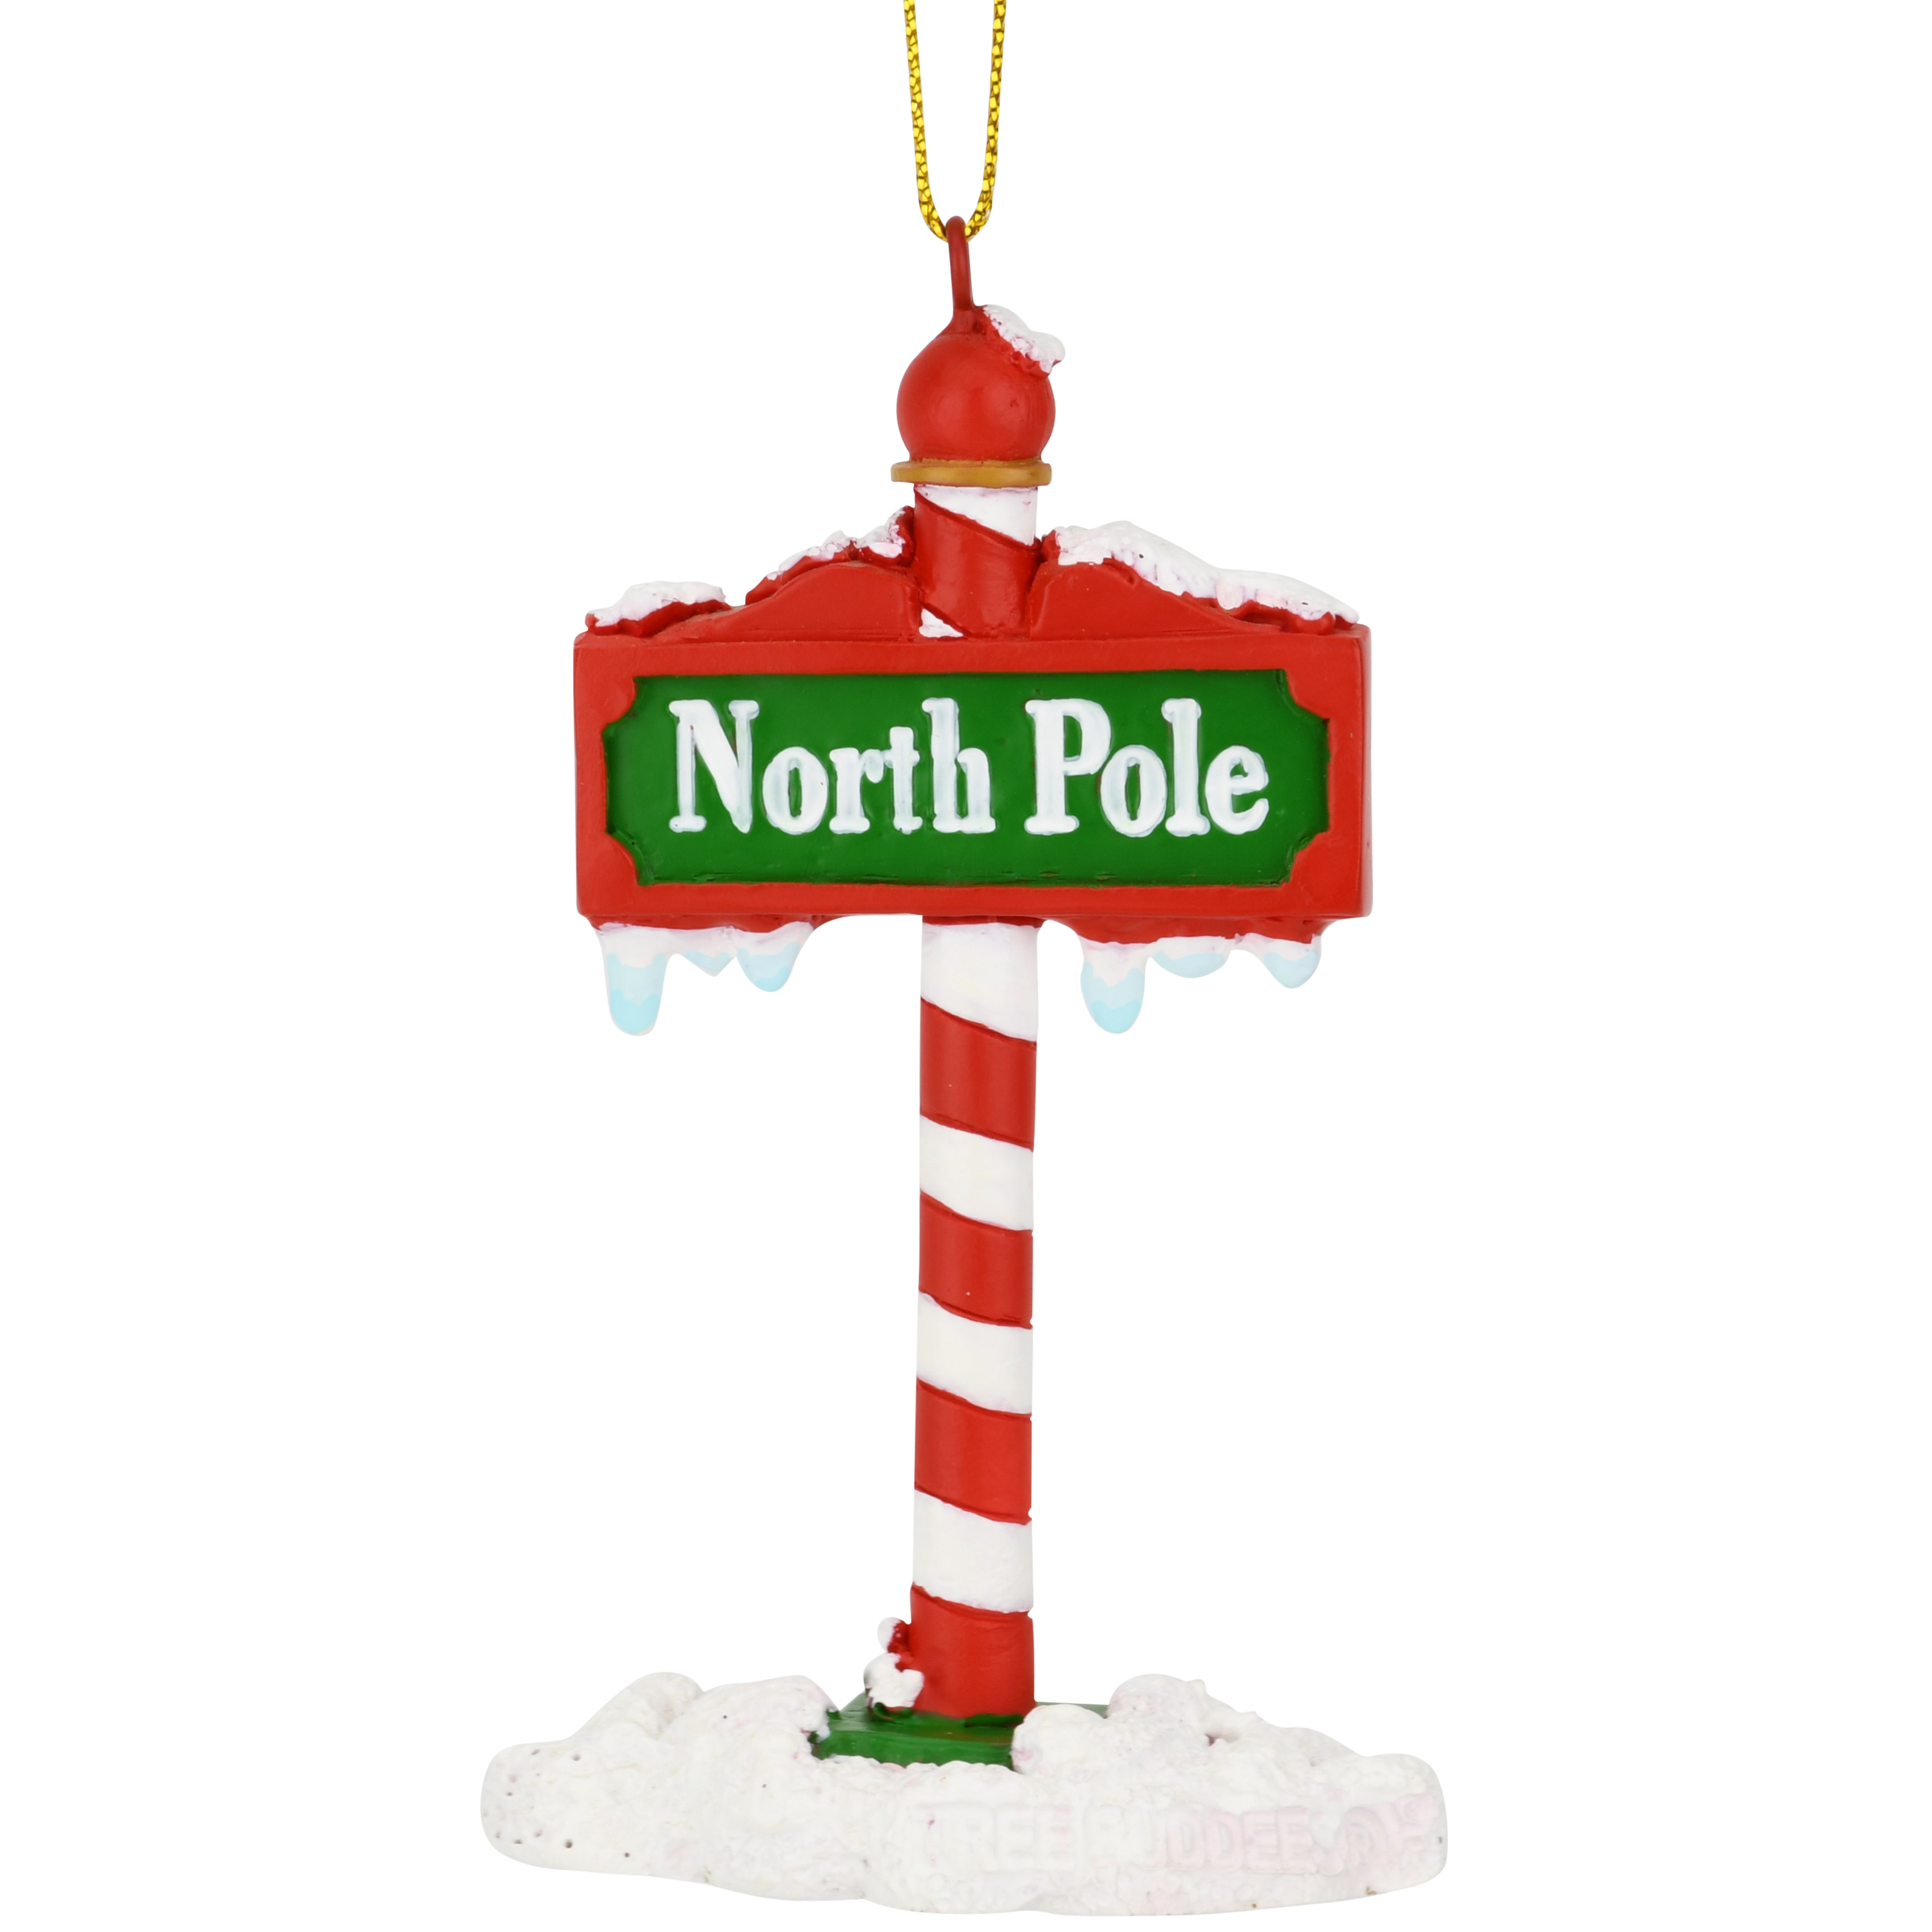 The North Pole Sign Covered in Snow Christmas Tree Ornaments